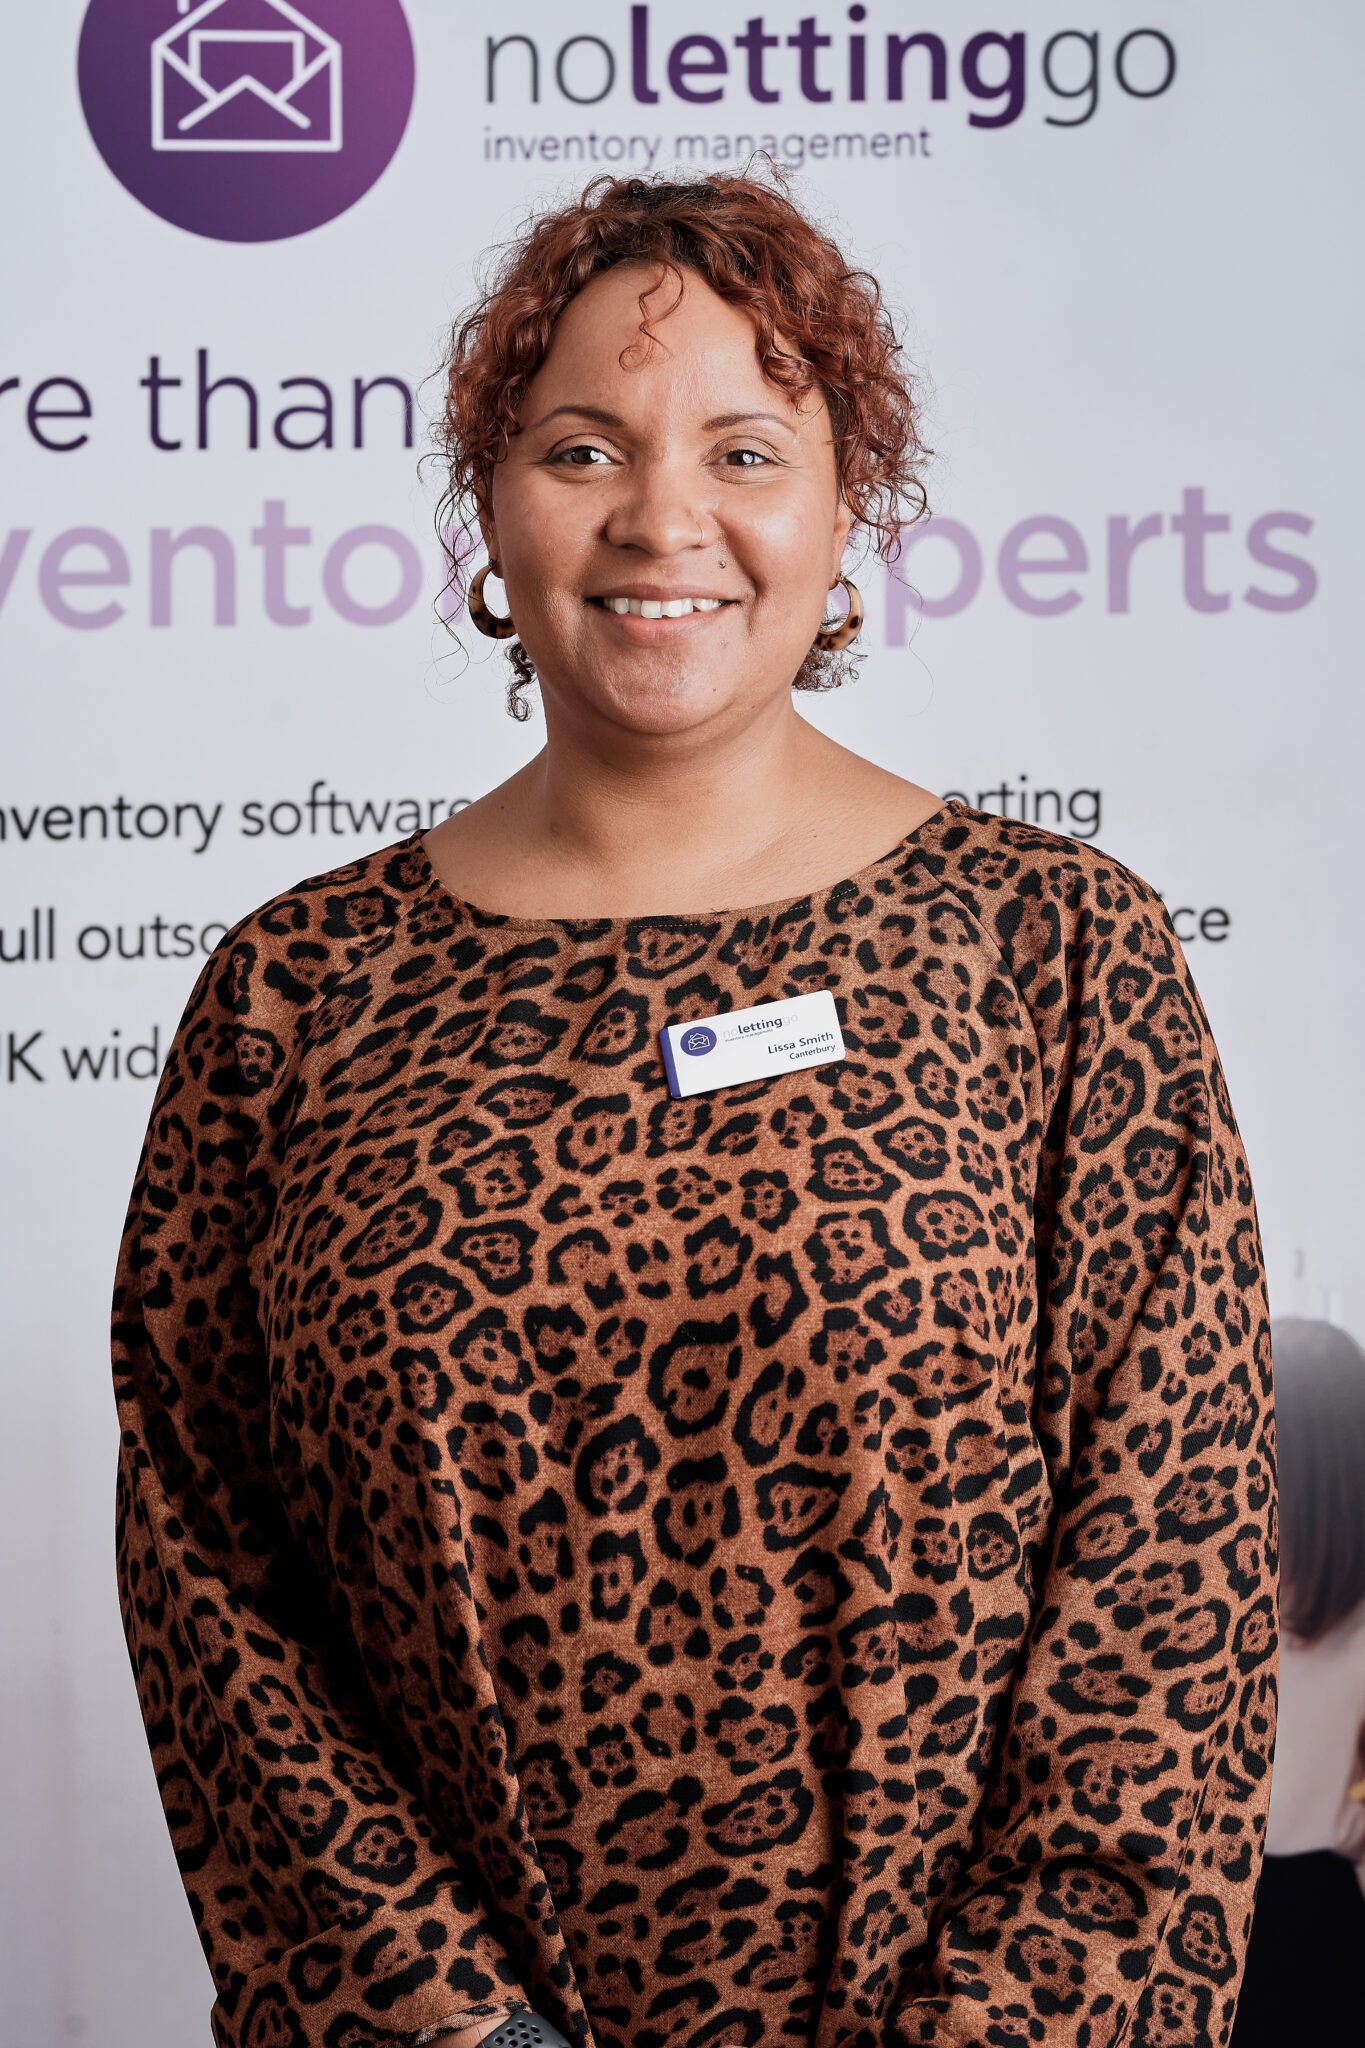 Lissa Smith - Property Inventory Management Canterbury